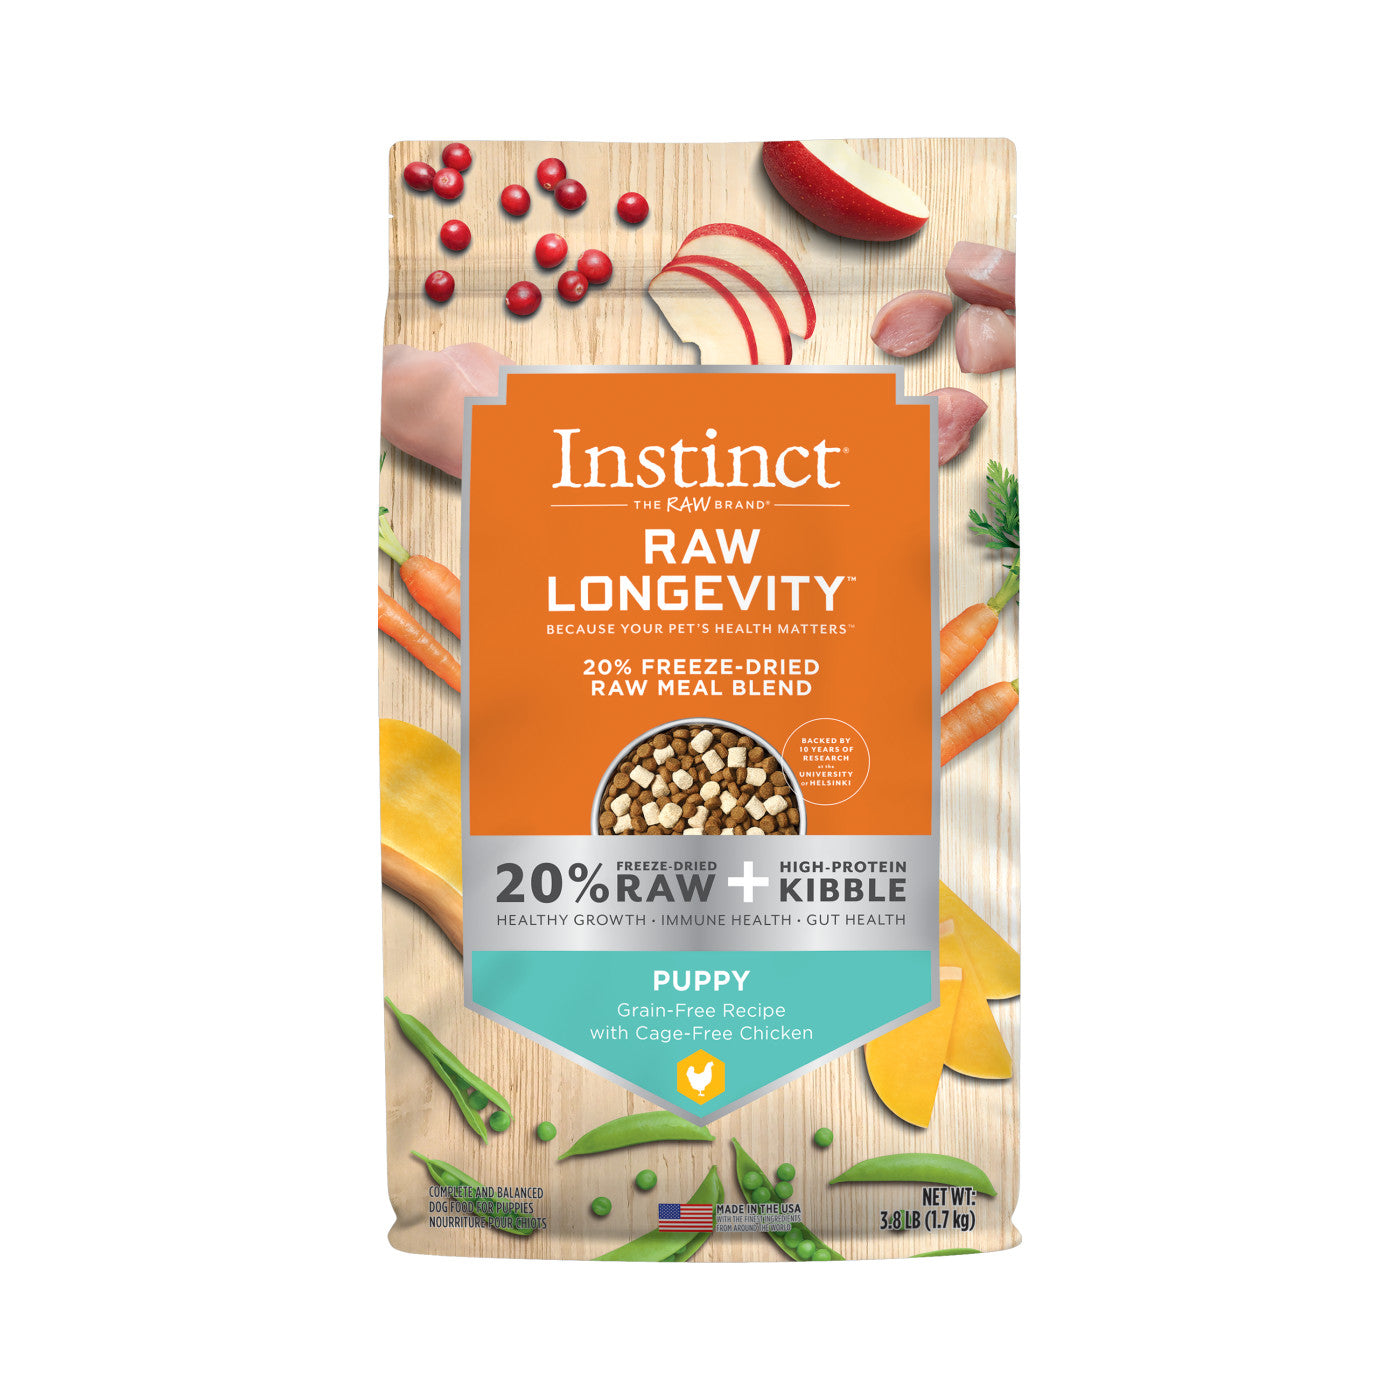 INSTINCT® DOG FOOD RAW LONGEVITY 20% FREEZE-DRIED RAW MEAL BLEND CAGE-FREE CHICKEN RECIPE FOR PUPPIES